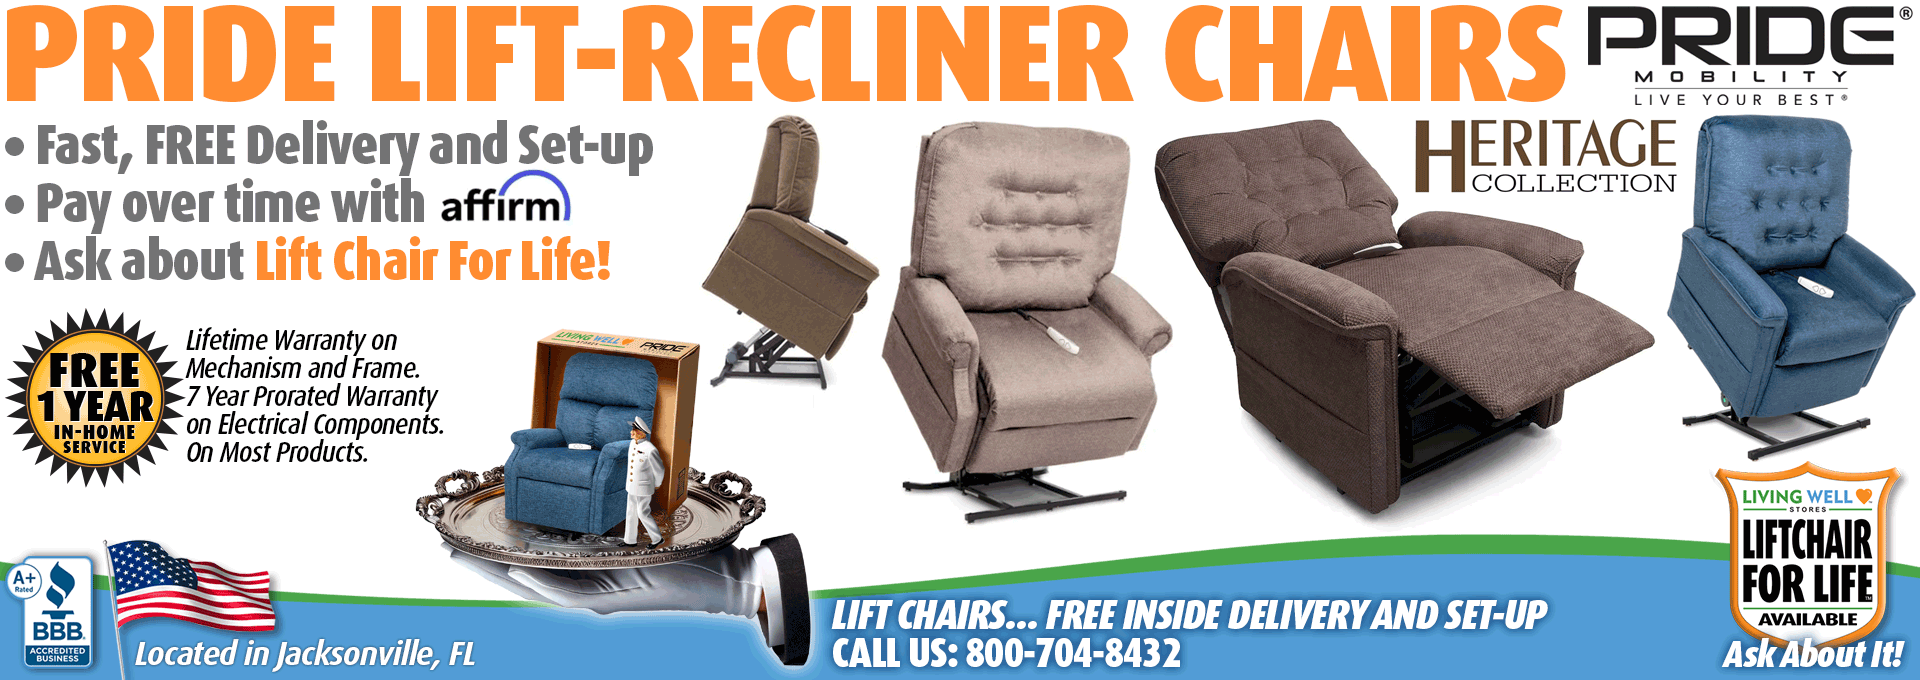 Living Well Stores: Heritage Collection of Power Lift Recliner Chairs by Pride Mobility